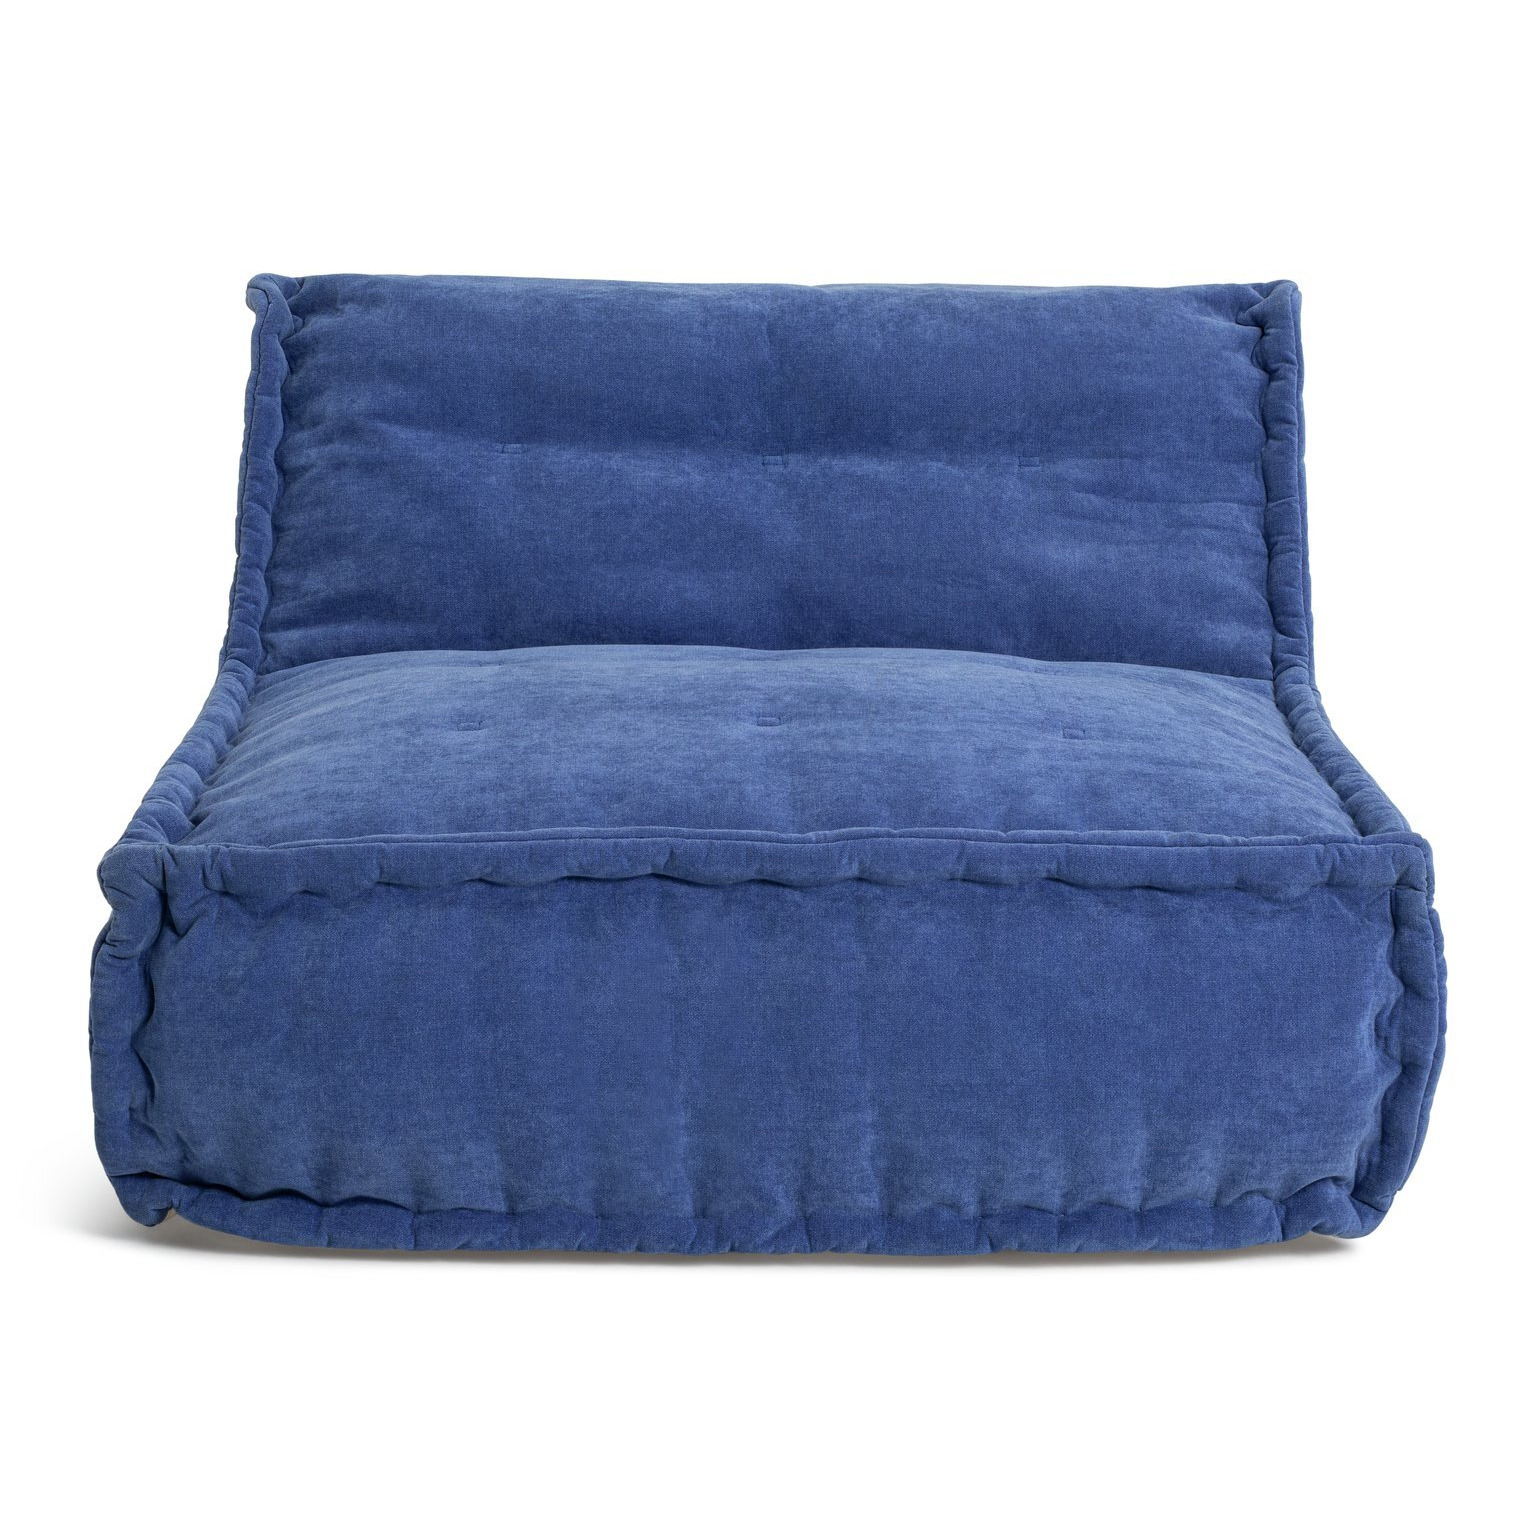 Kaikoo Estelle Quilted Bean Bag - Blue - image 1